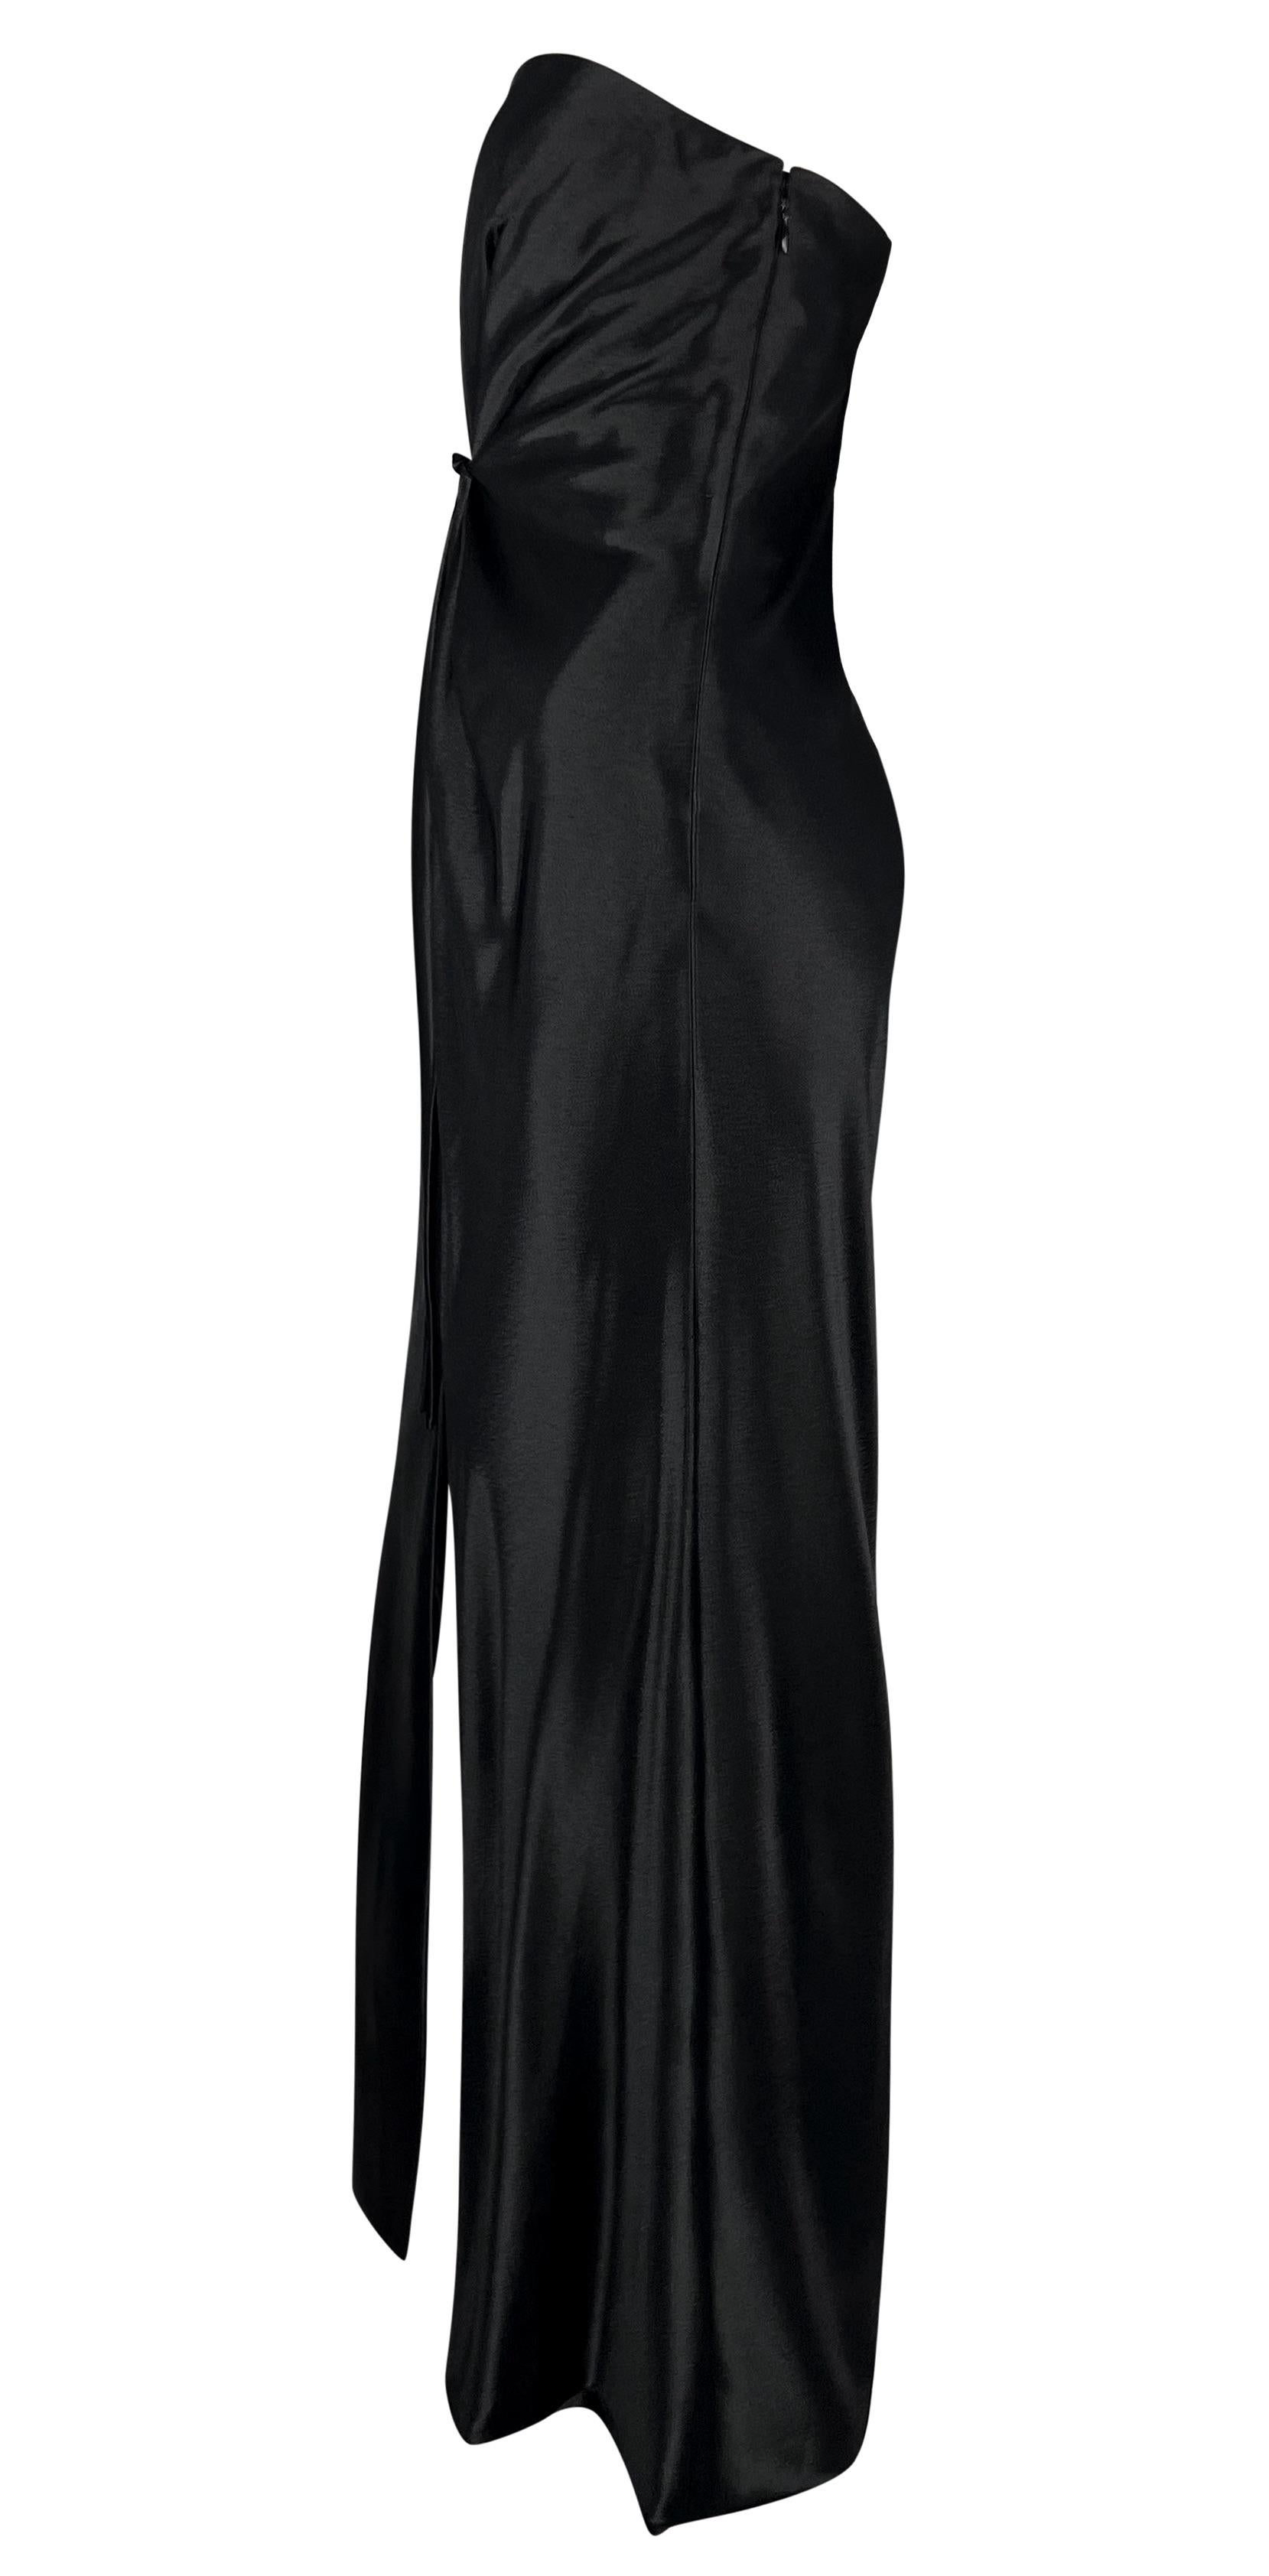 F/W 1997 Gianni Versace Strapless Satin Tie-Front Black Gown For Sale 2